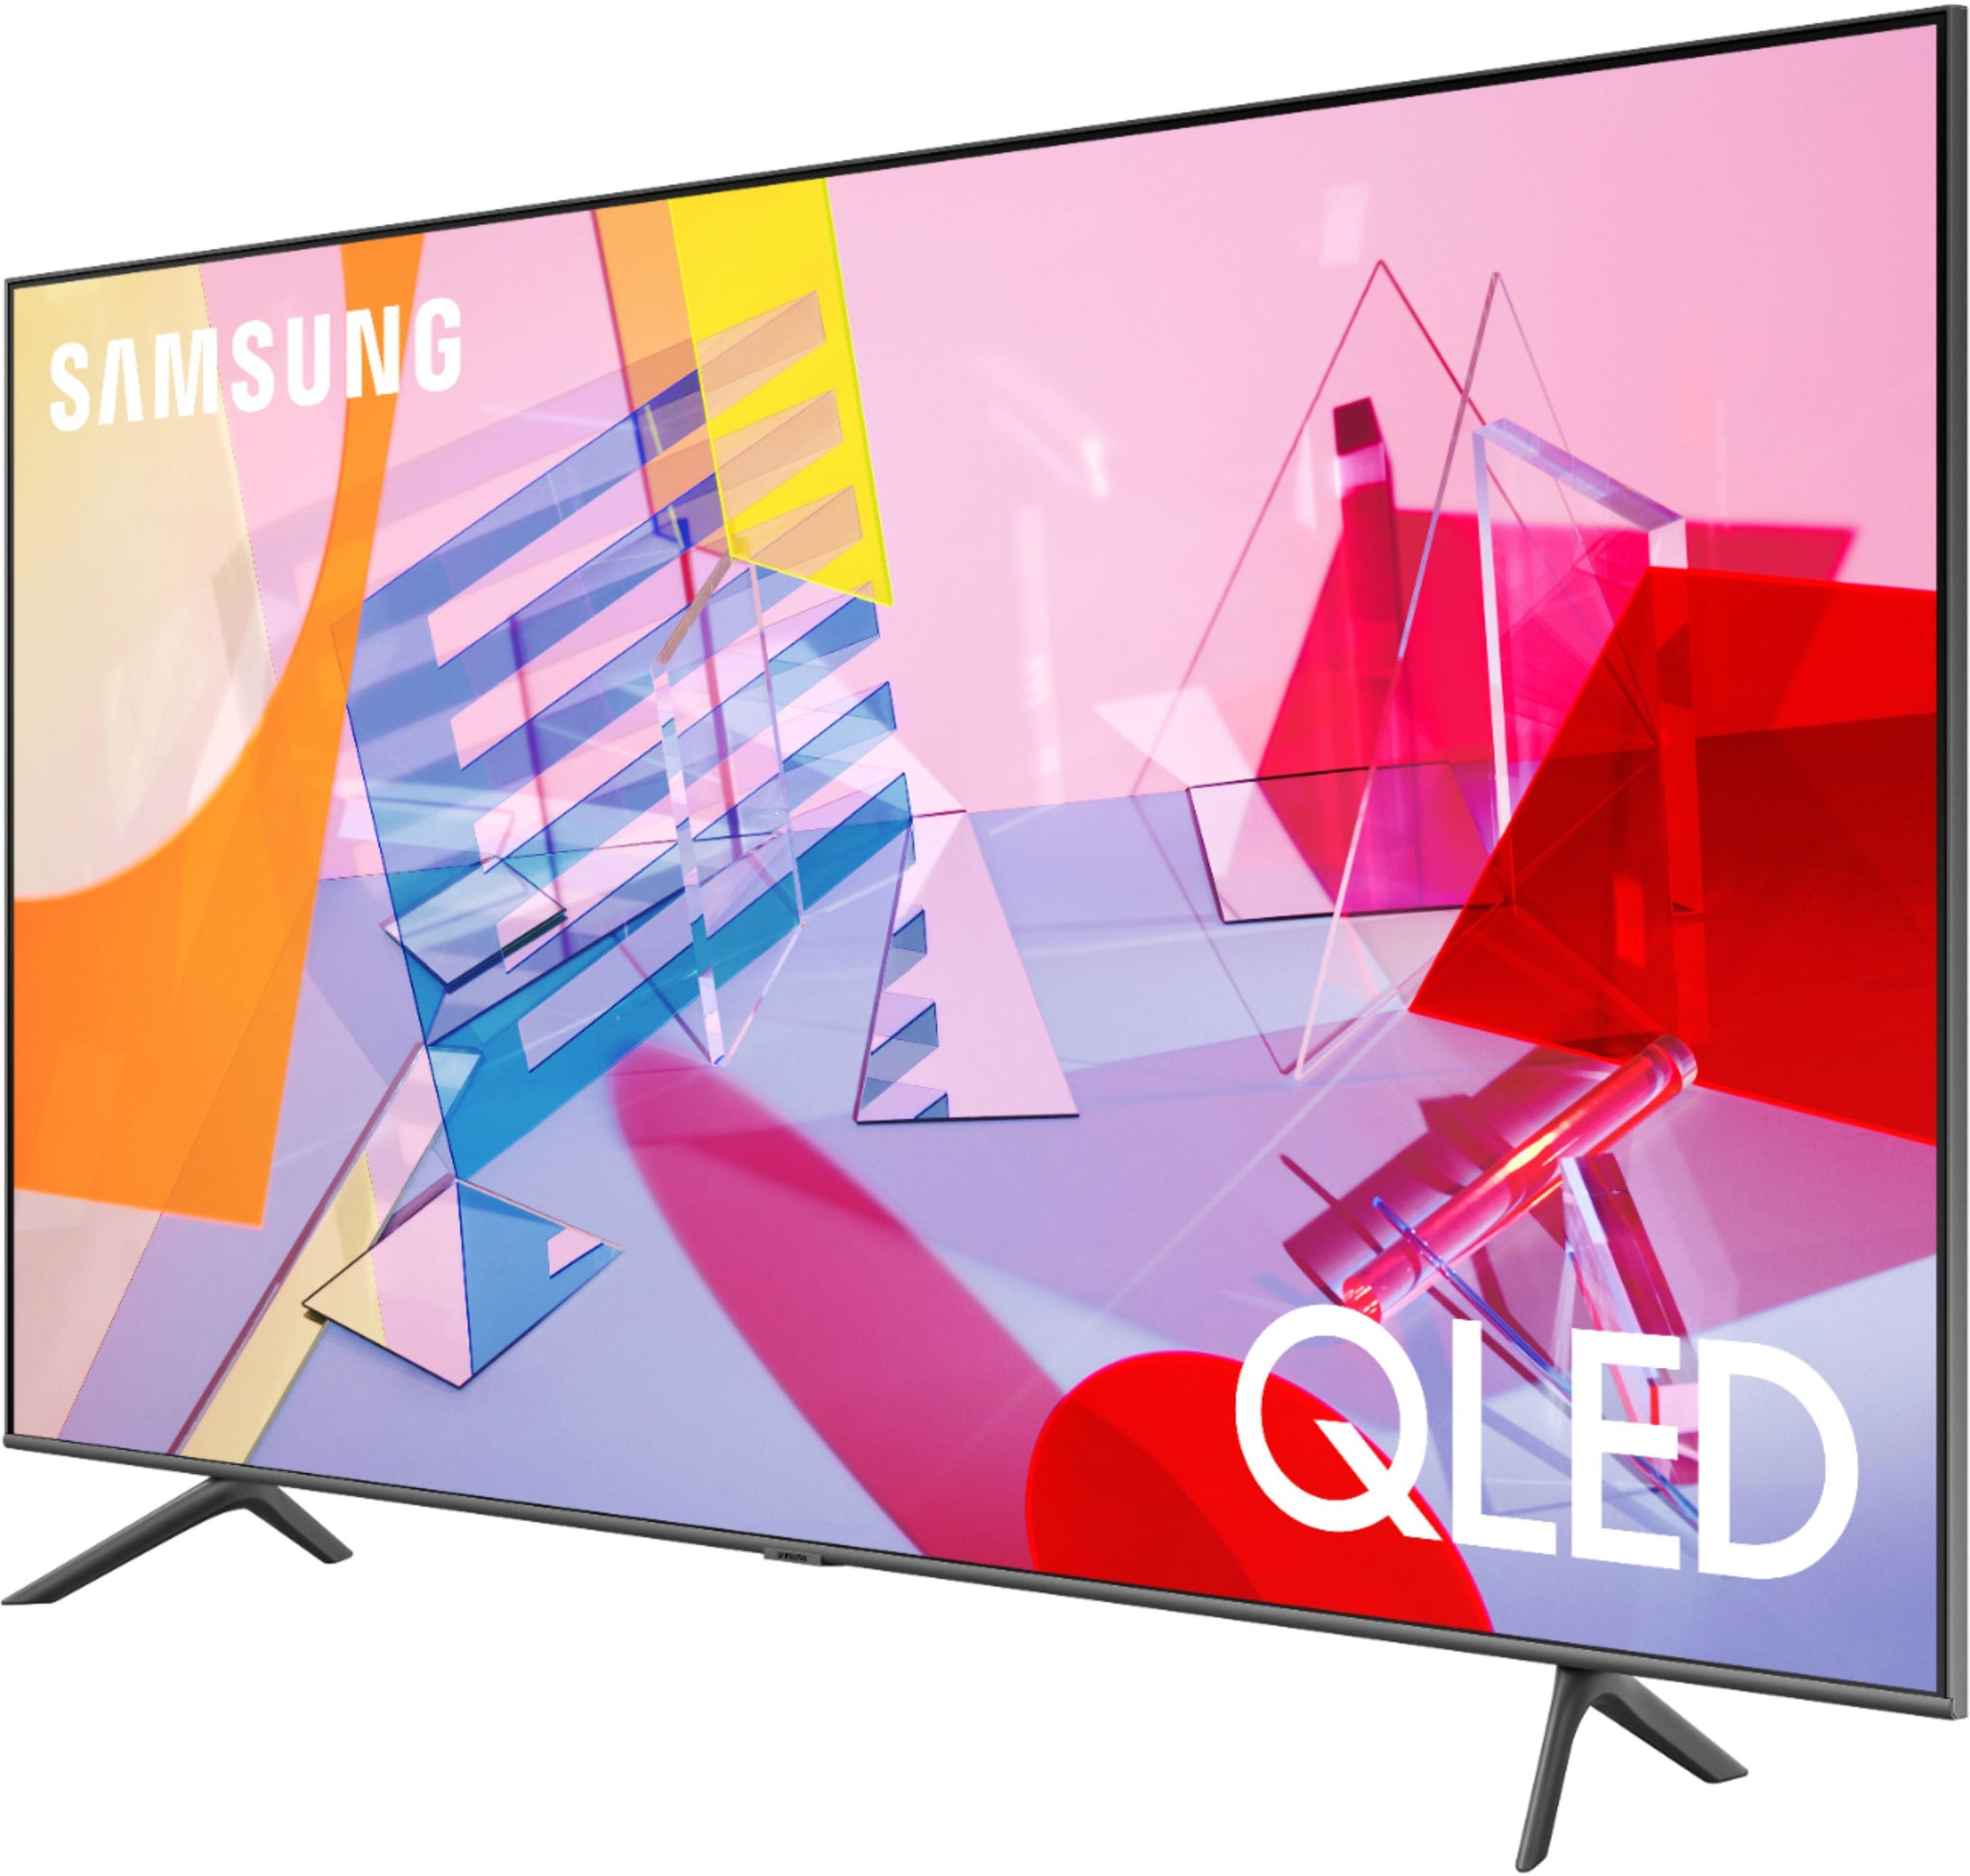 Samsung 82" Class Q6D QLED Smart 4K UHD TV (Refurbished) Tv's ONLY for delivery in San Diego and Tijuana